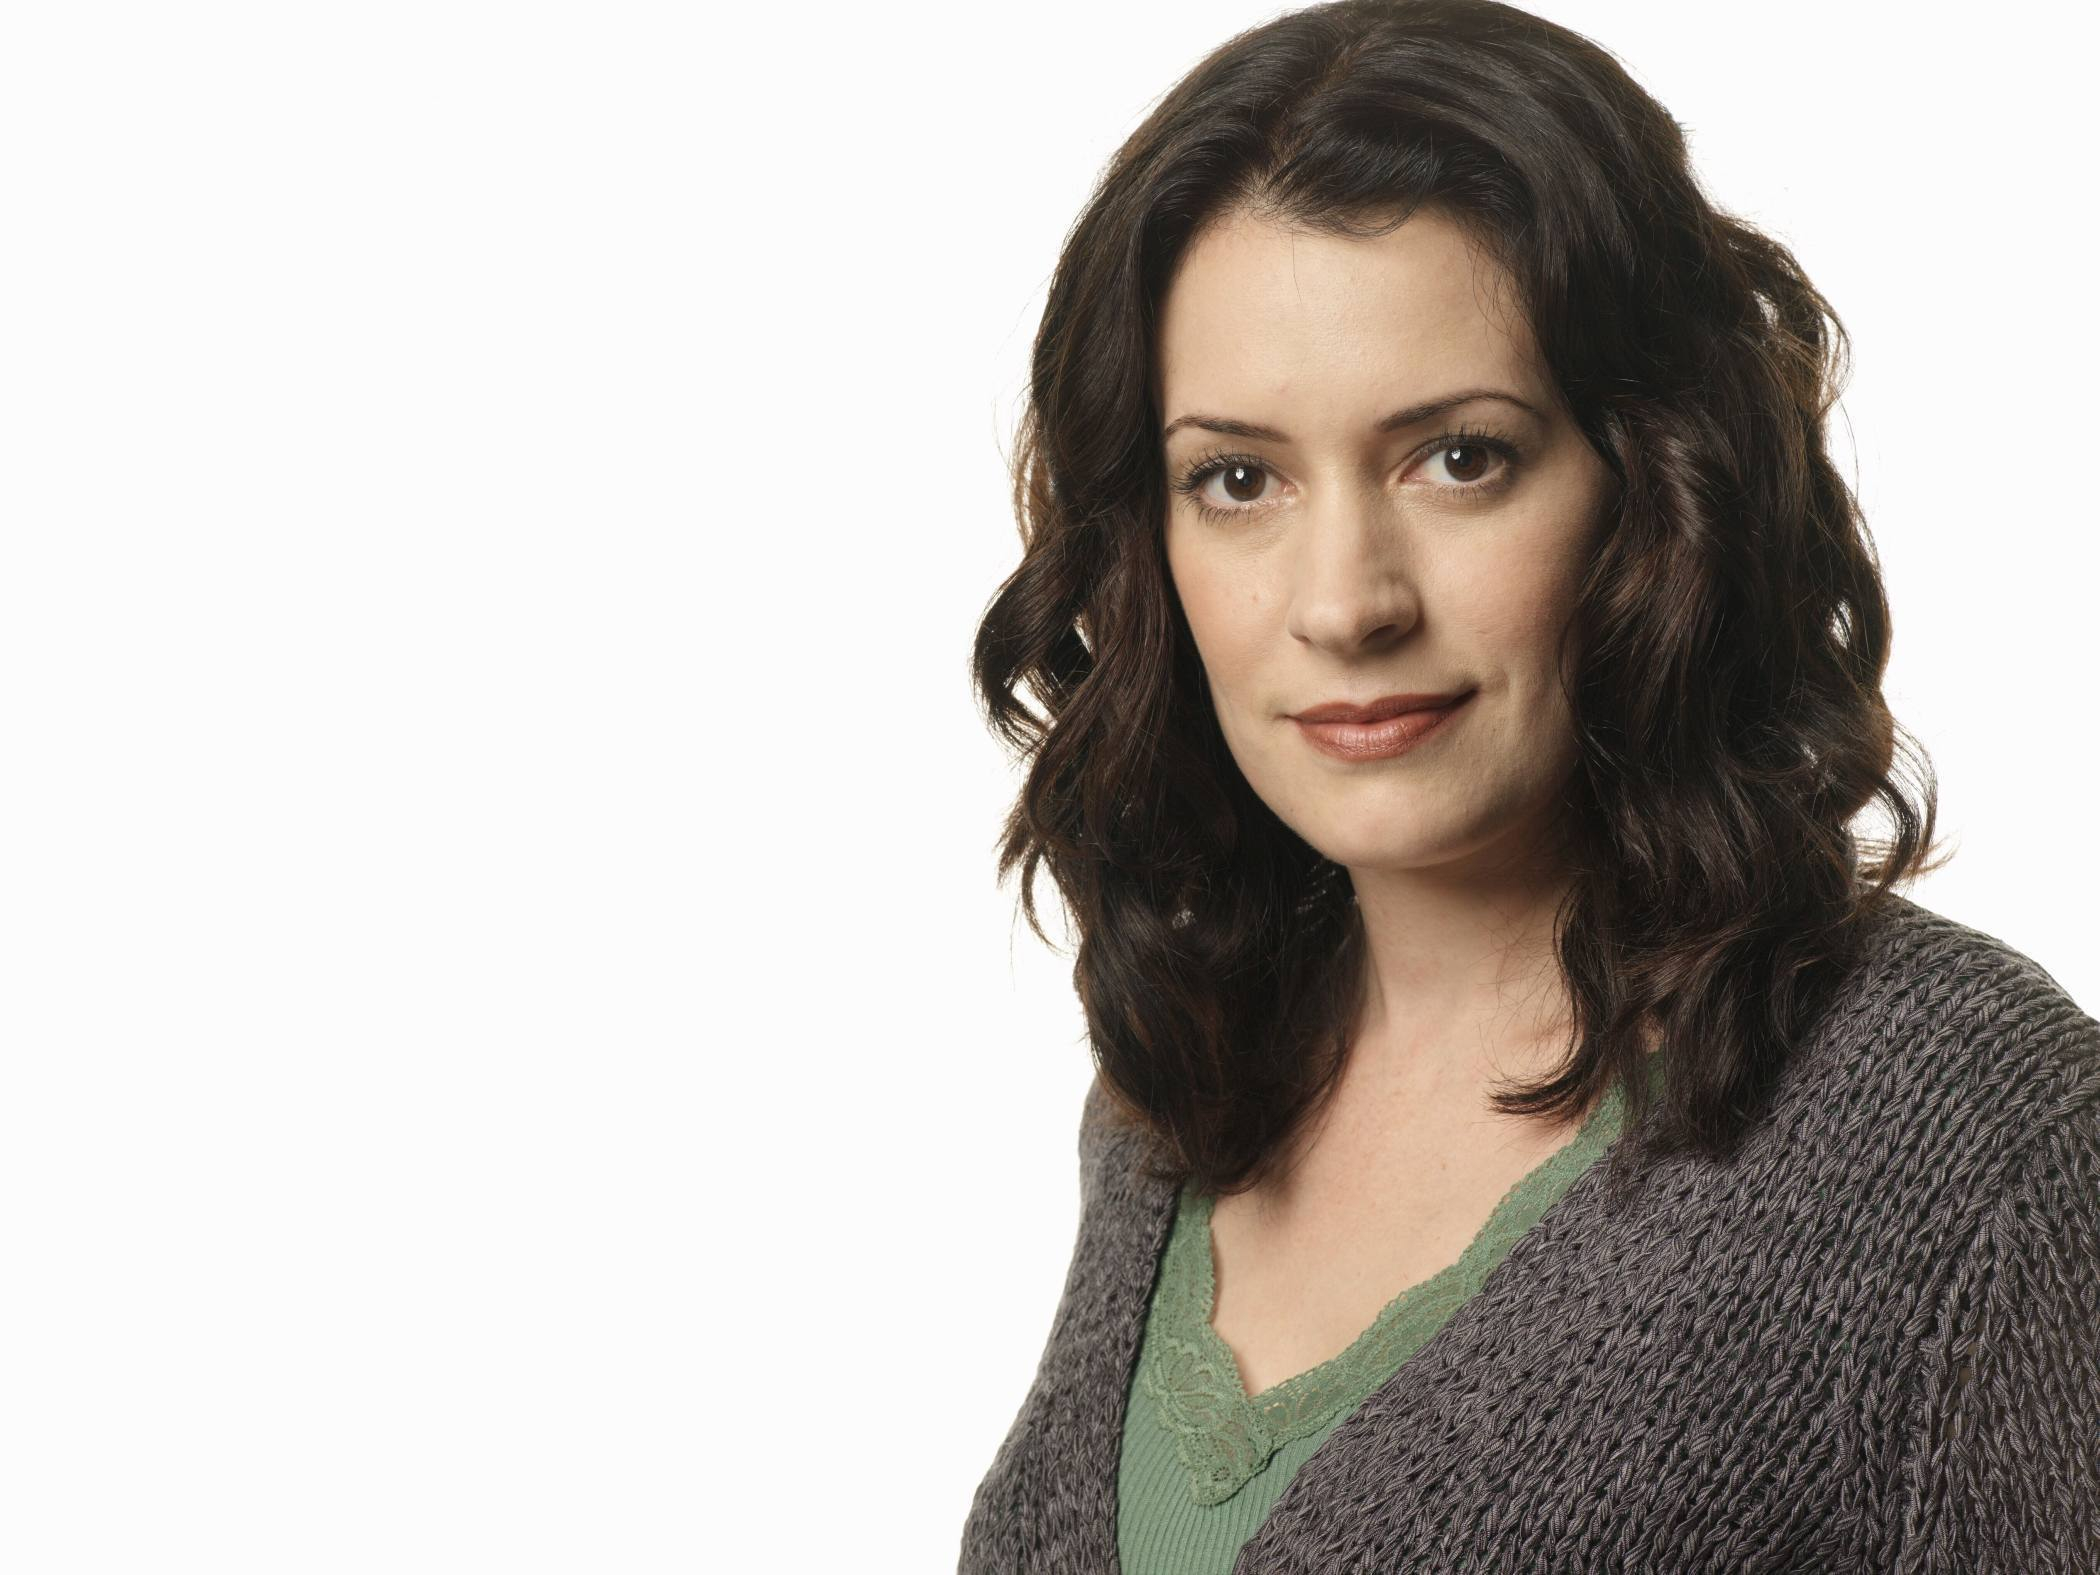 2100x1575 Wallpapers Paget Brewster